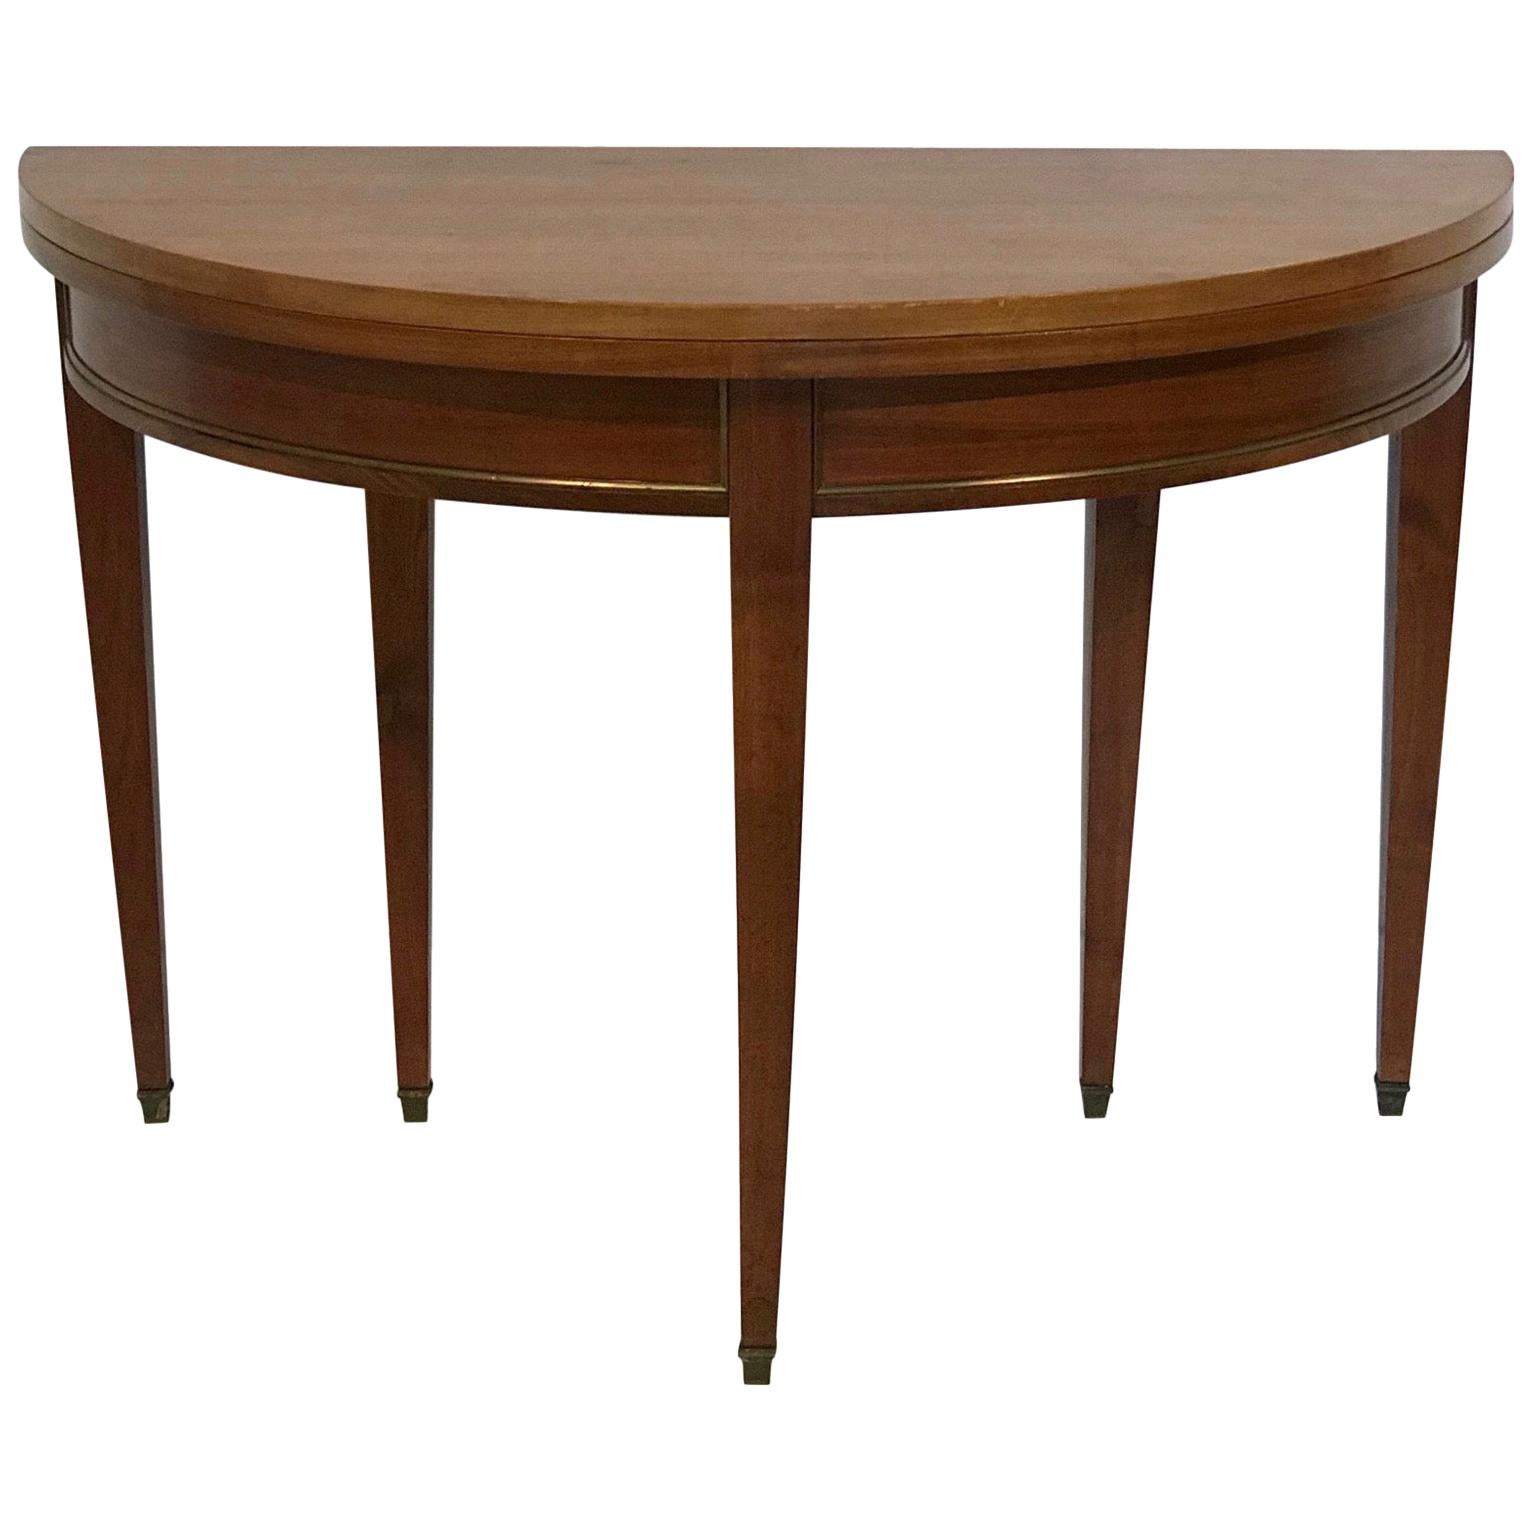 French Directoire Style Cherrywood Demilune Table